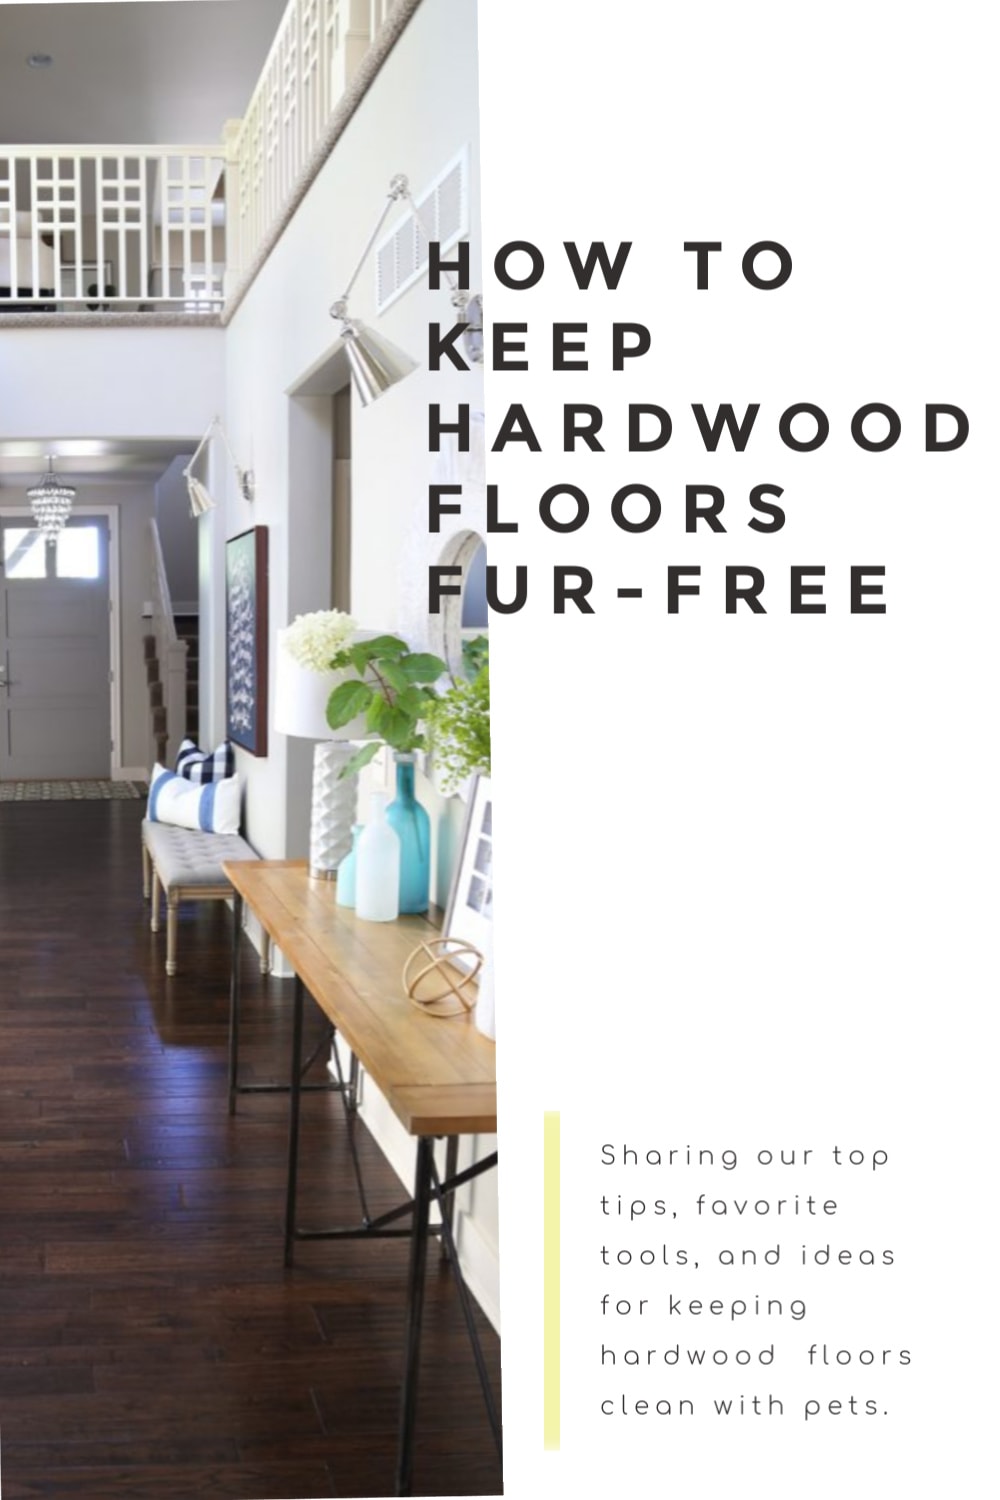 How To Have Fur Free Floors With Pets, Cats And Hardwood Floors